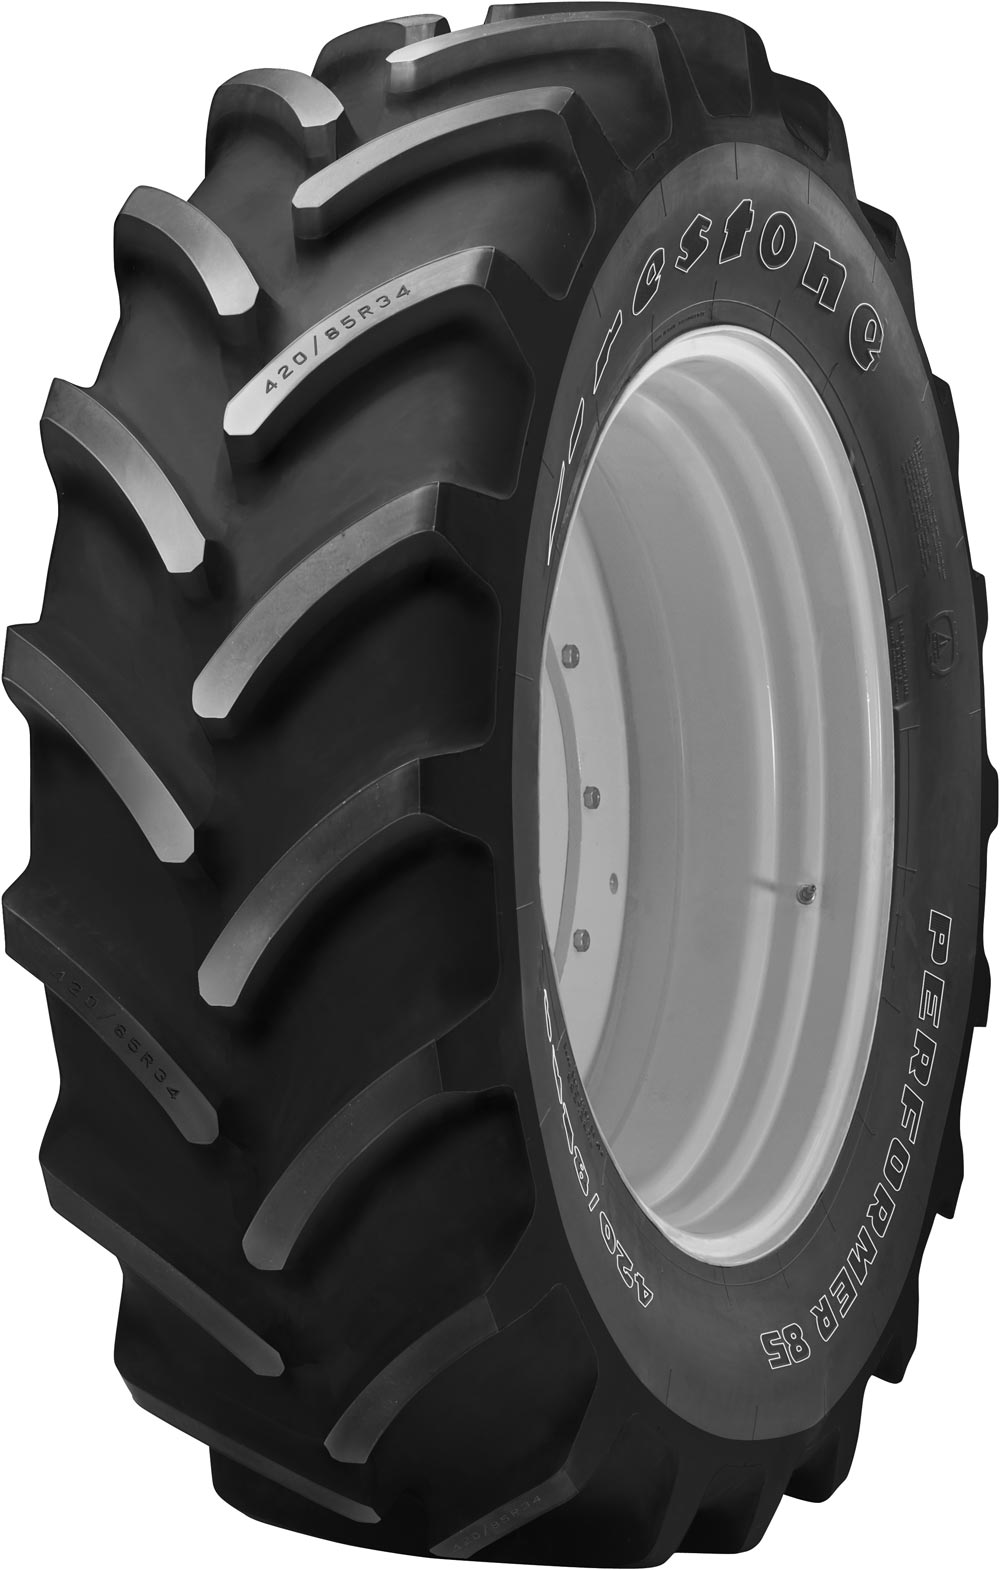 product_type-industrial_tires FIRESTONE PERF85 340/85 R28 124R